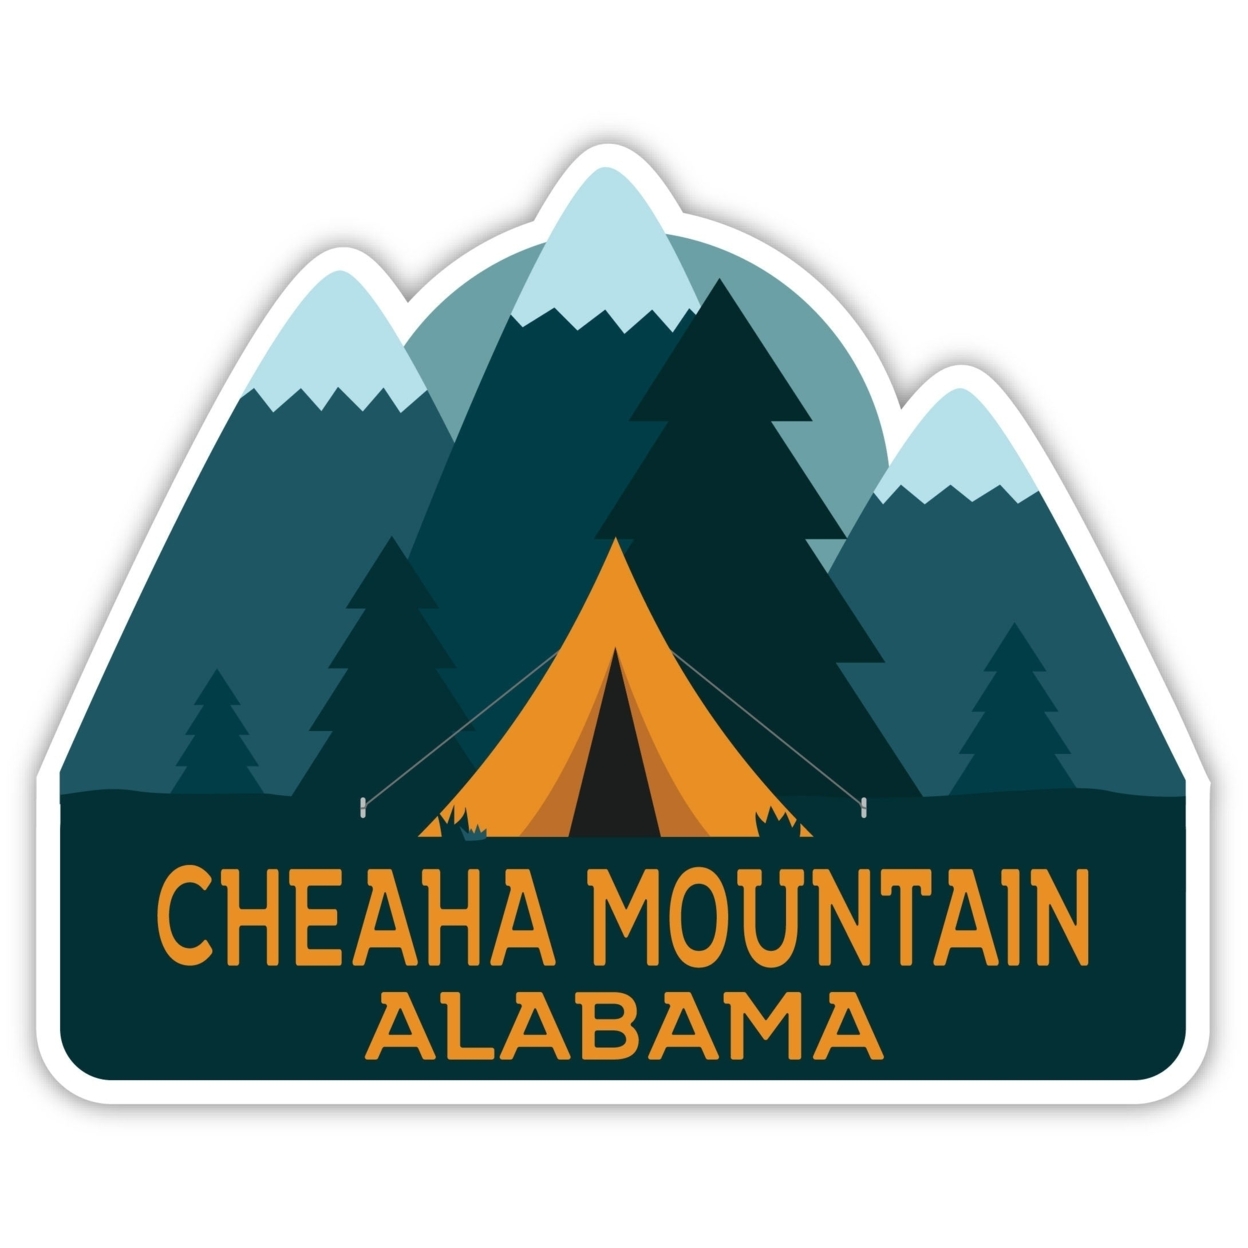 Cheaha Mountain Alabama Souvenir Decorative Stickers (Choose Theme And Size) - 4-Pack, 10-Inch, Bear